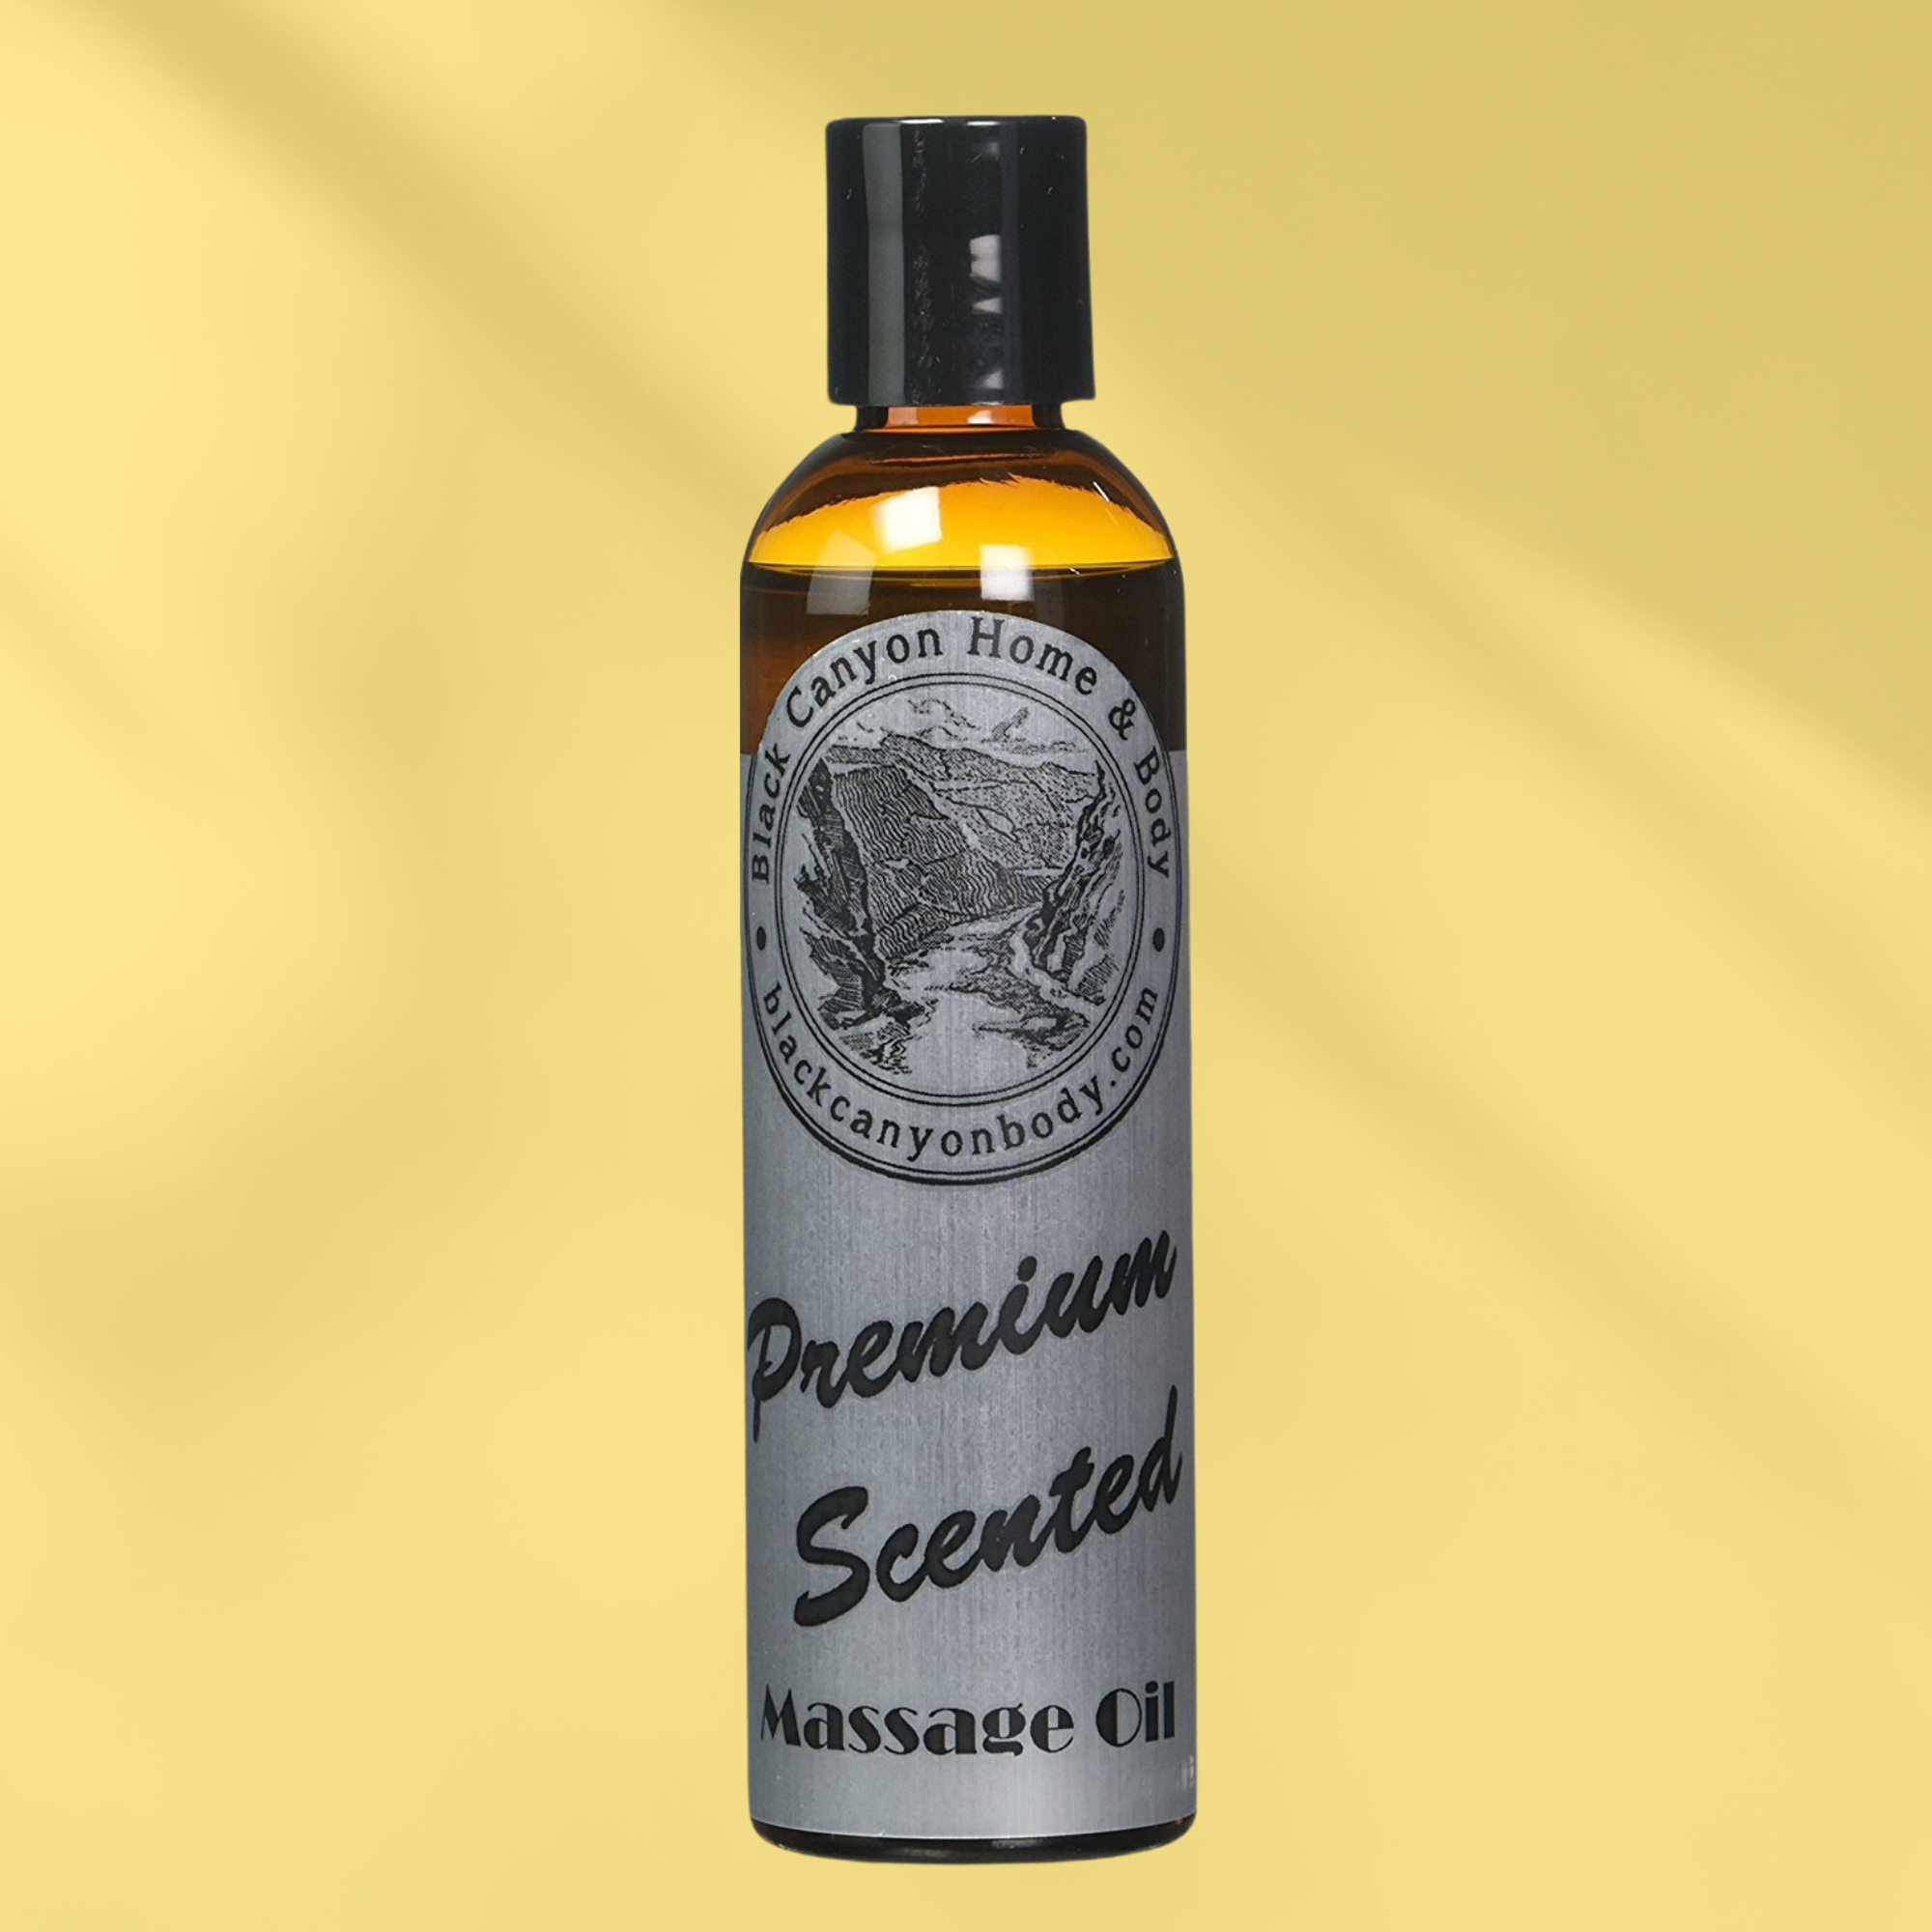 Black Canyon Winter Frost Scented Massage Oil